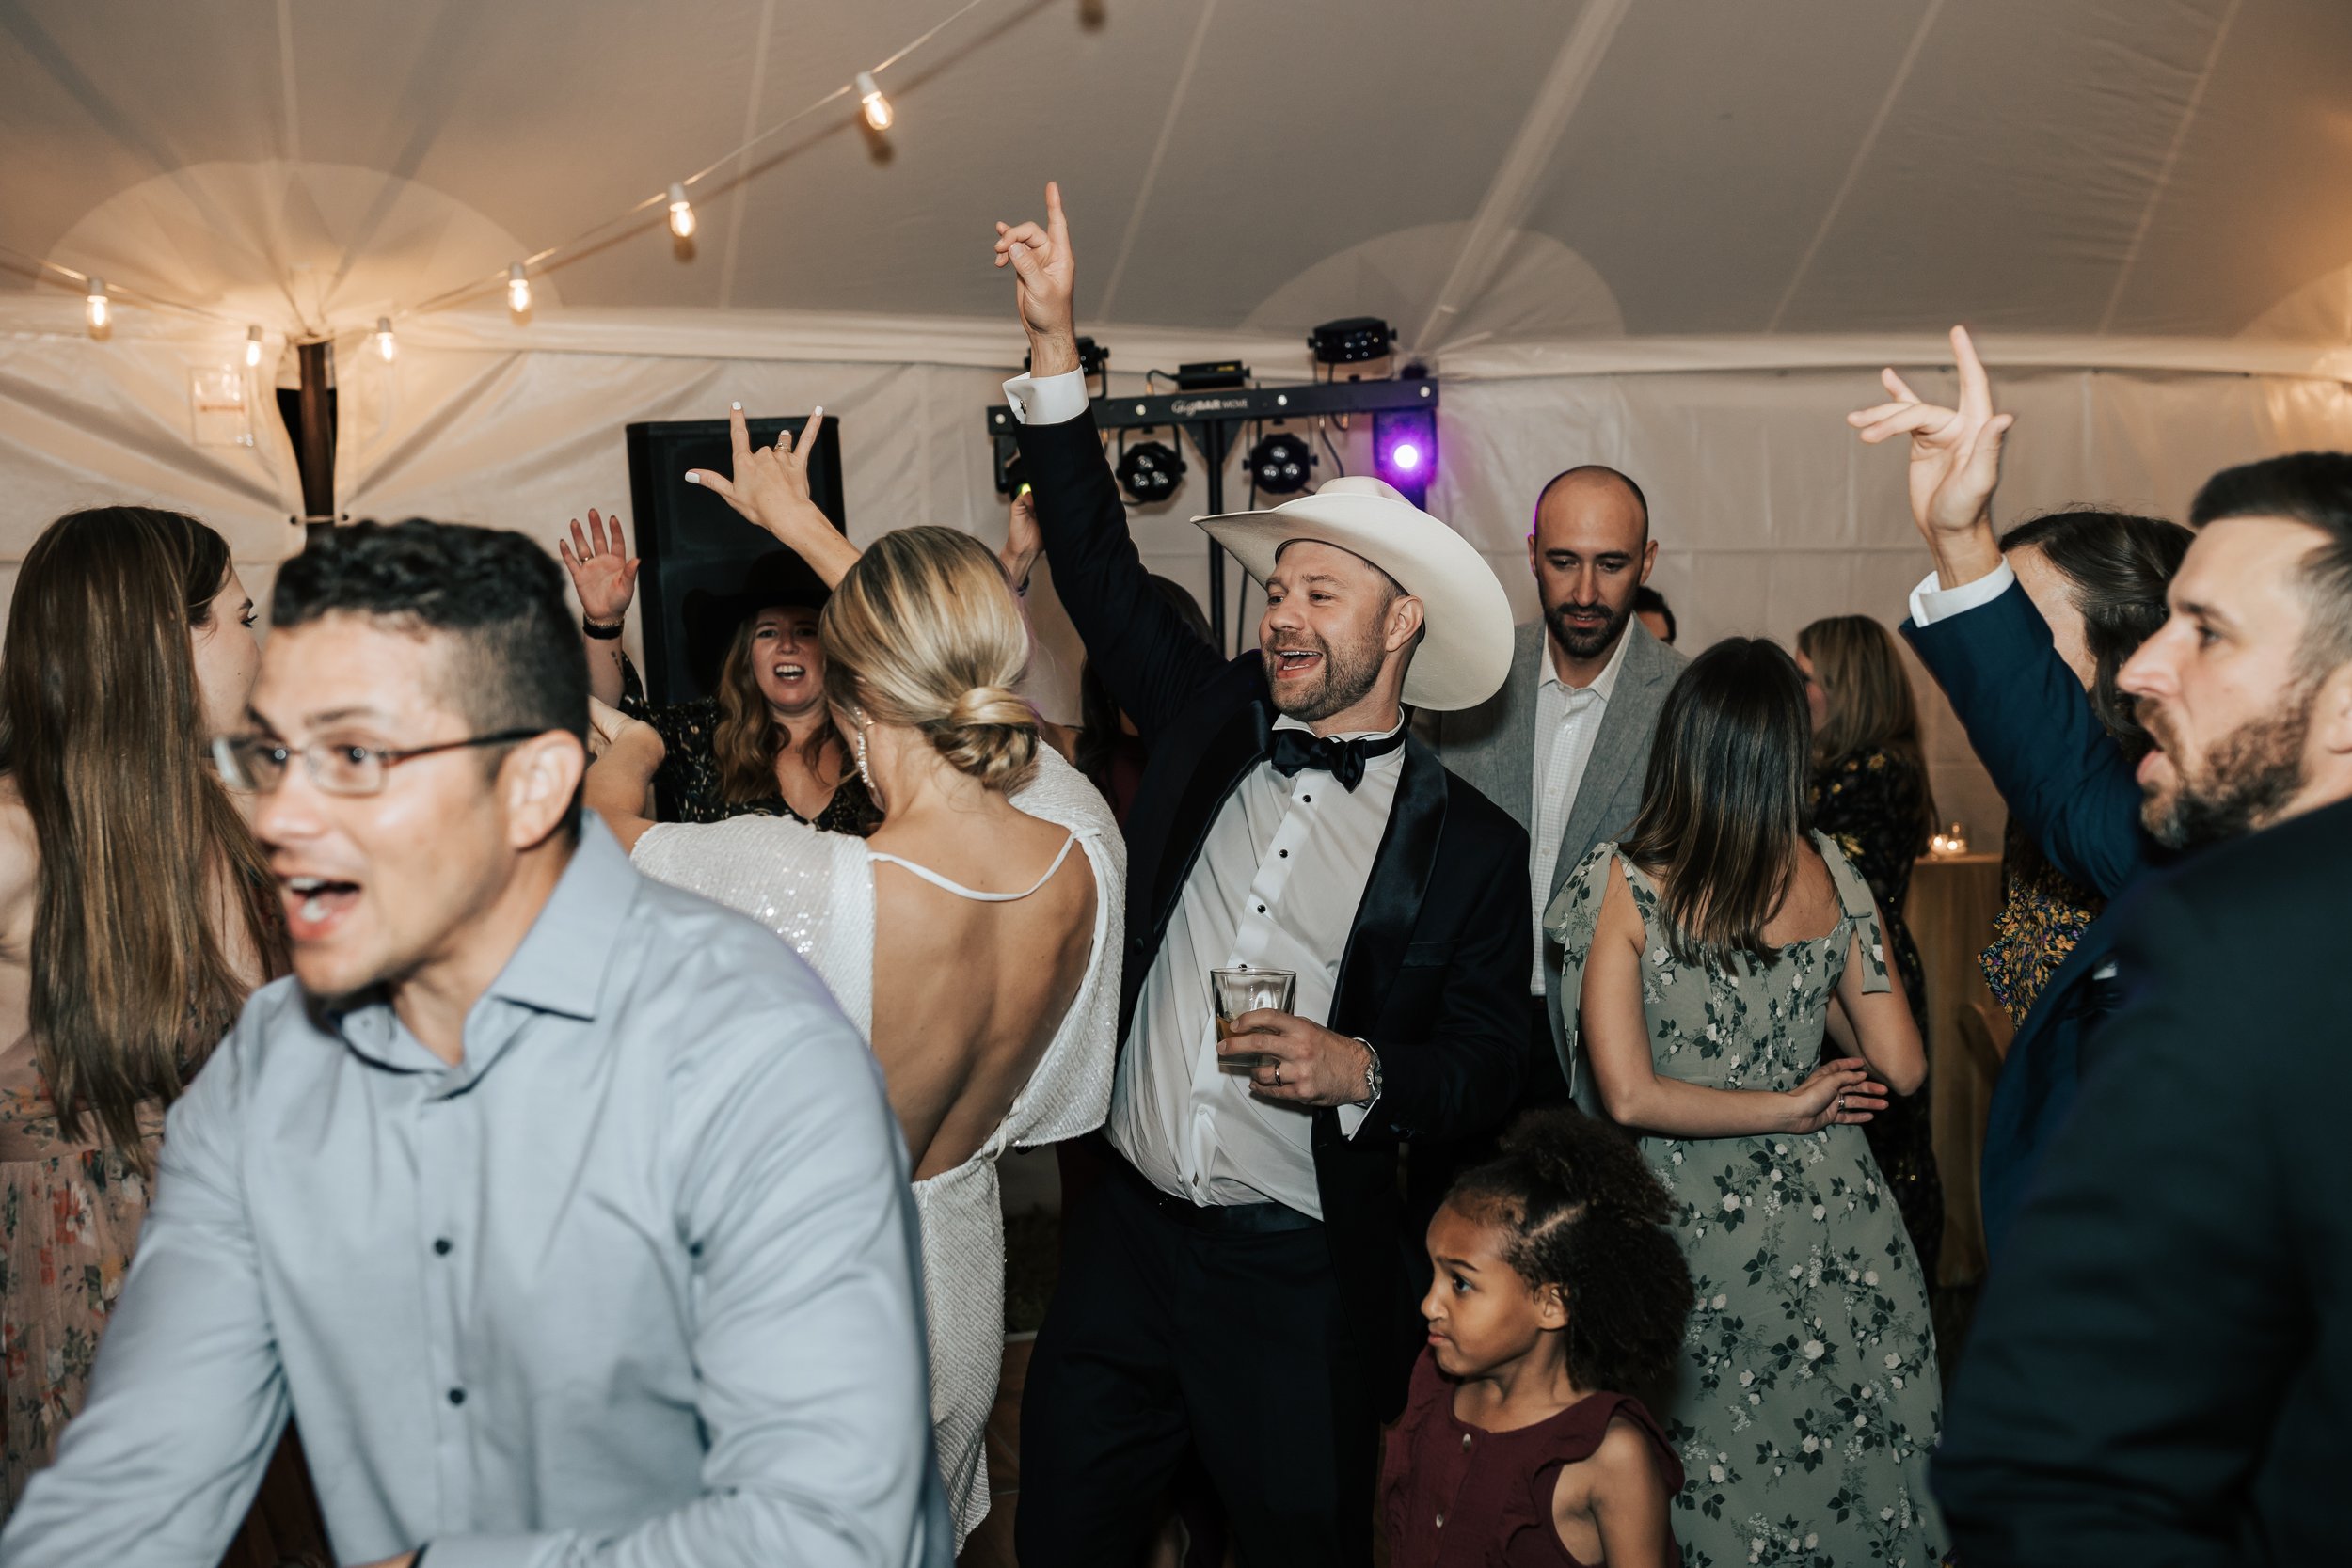  Wedding dance party. Bride and groom dance during their reception. Wedding inspo. Bride is wearing gorgeous large white earrings with a strappy wedding dress and veil and groom is wearing a black suit and bowtie. #montanawedding #emilyjenkinsphoto #